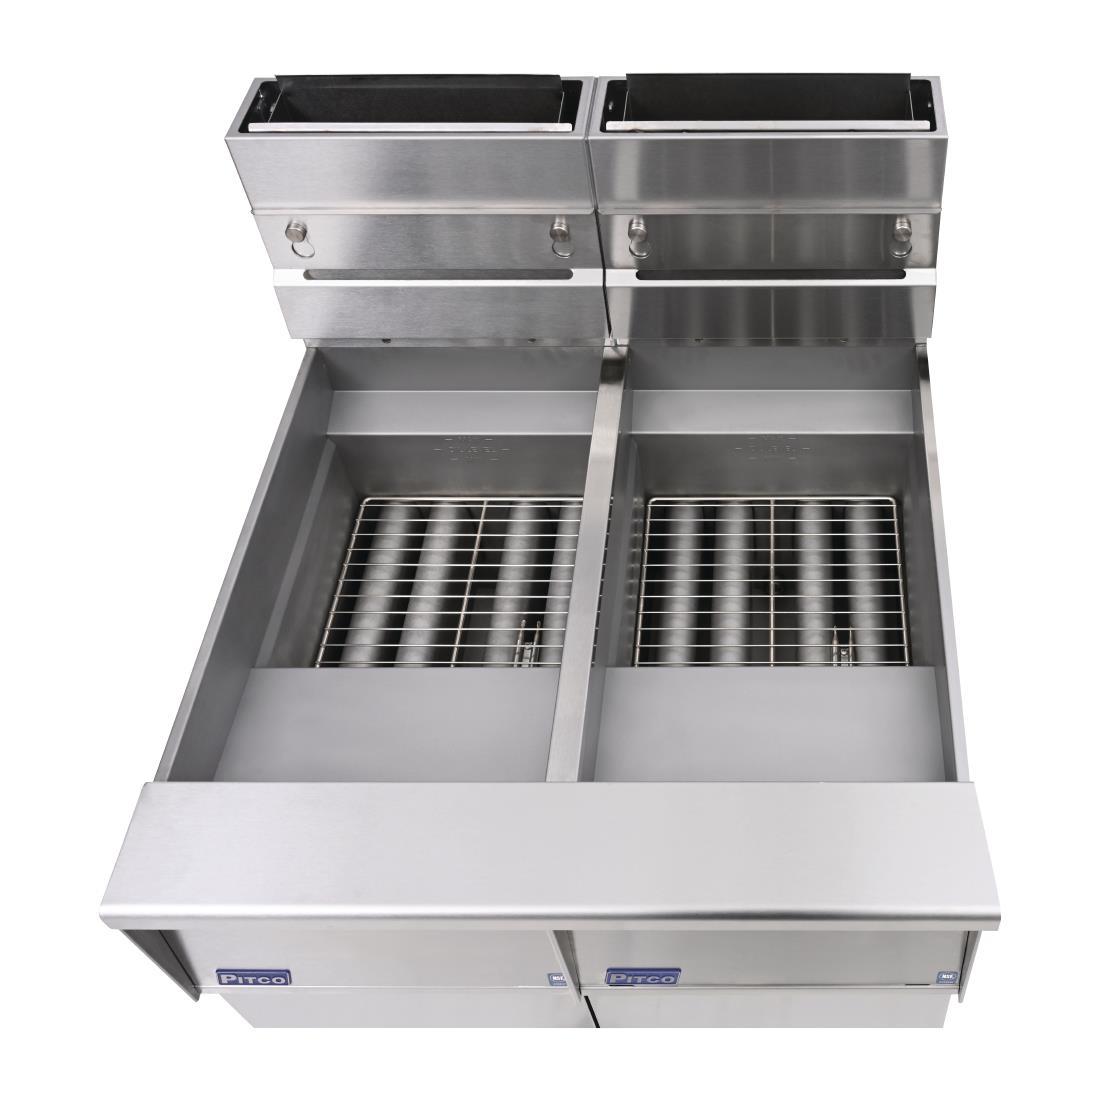 Pitco Twin Tank Solstice LPG Fryer with Filter Drawer SG14RS/FD-FF - FS128-P  - 5